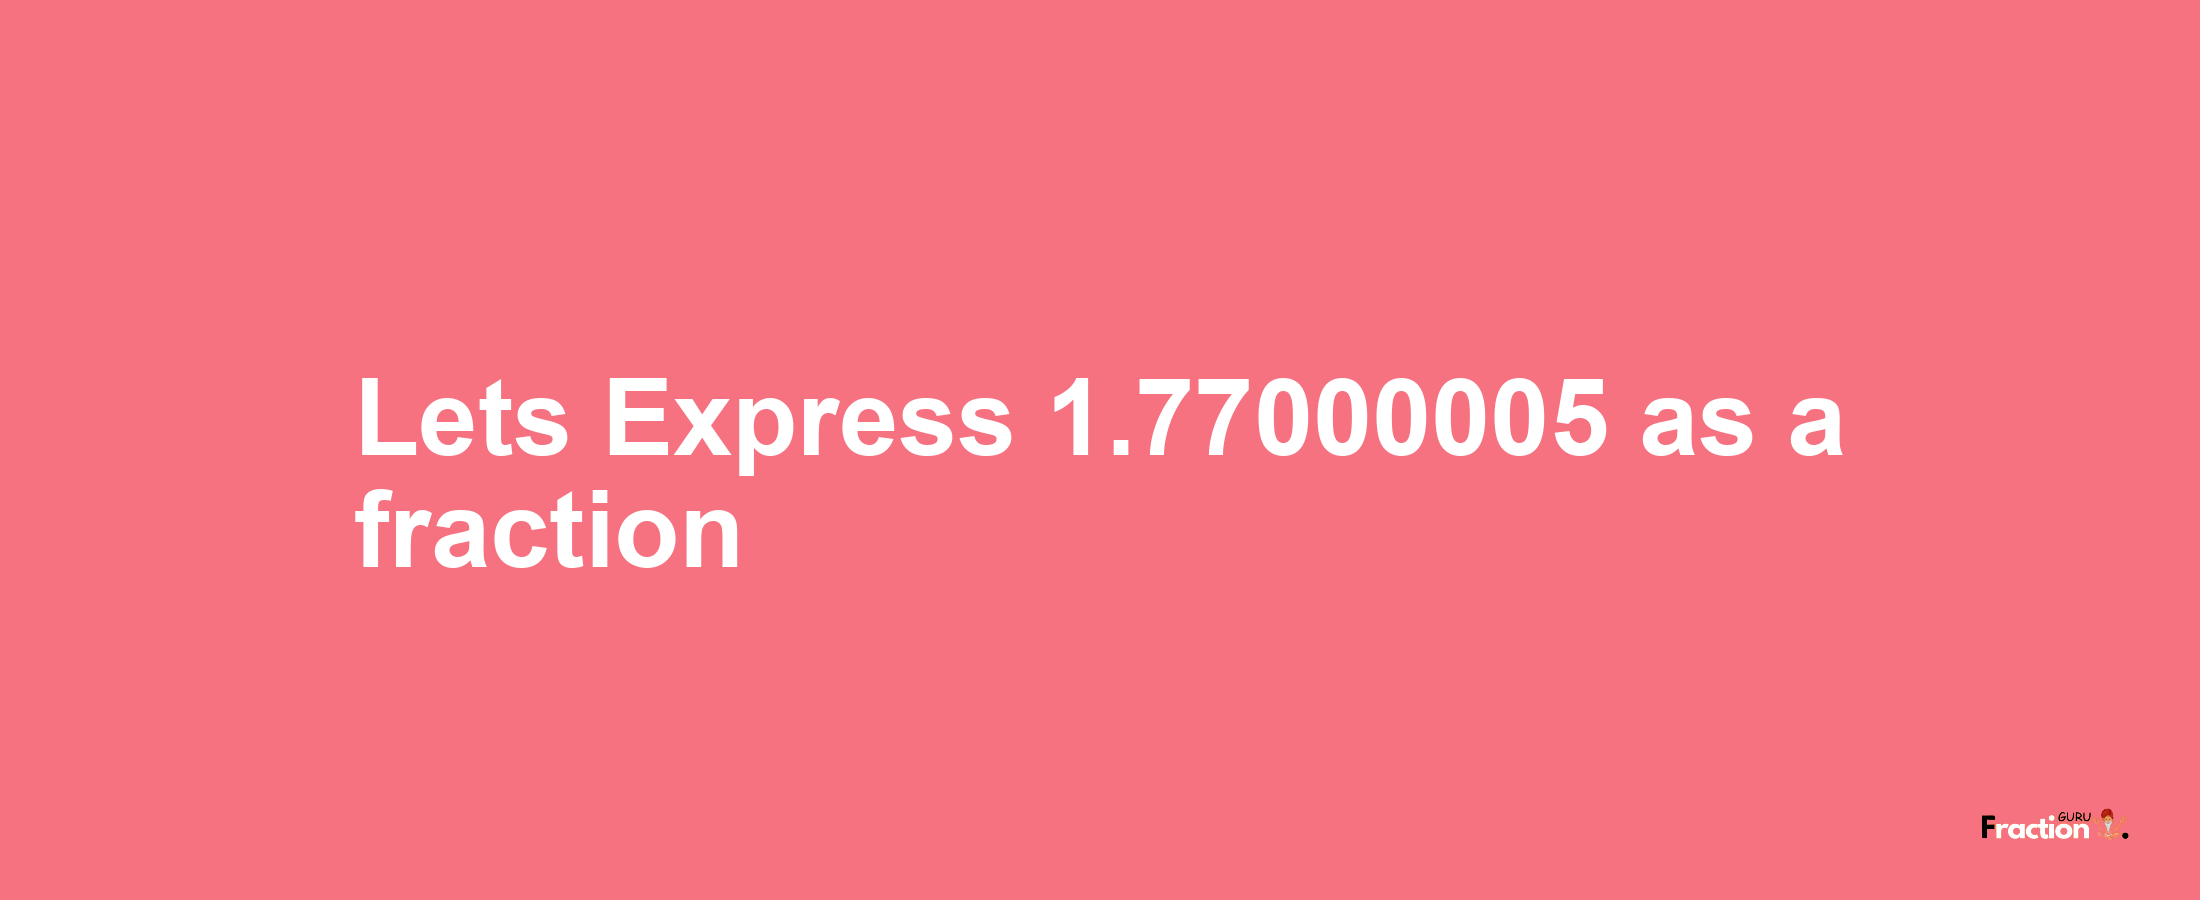 Lets Express 1.77000005 as afraction